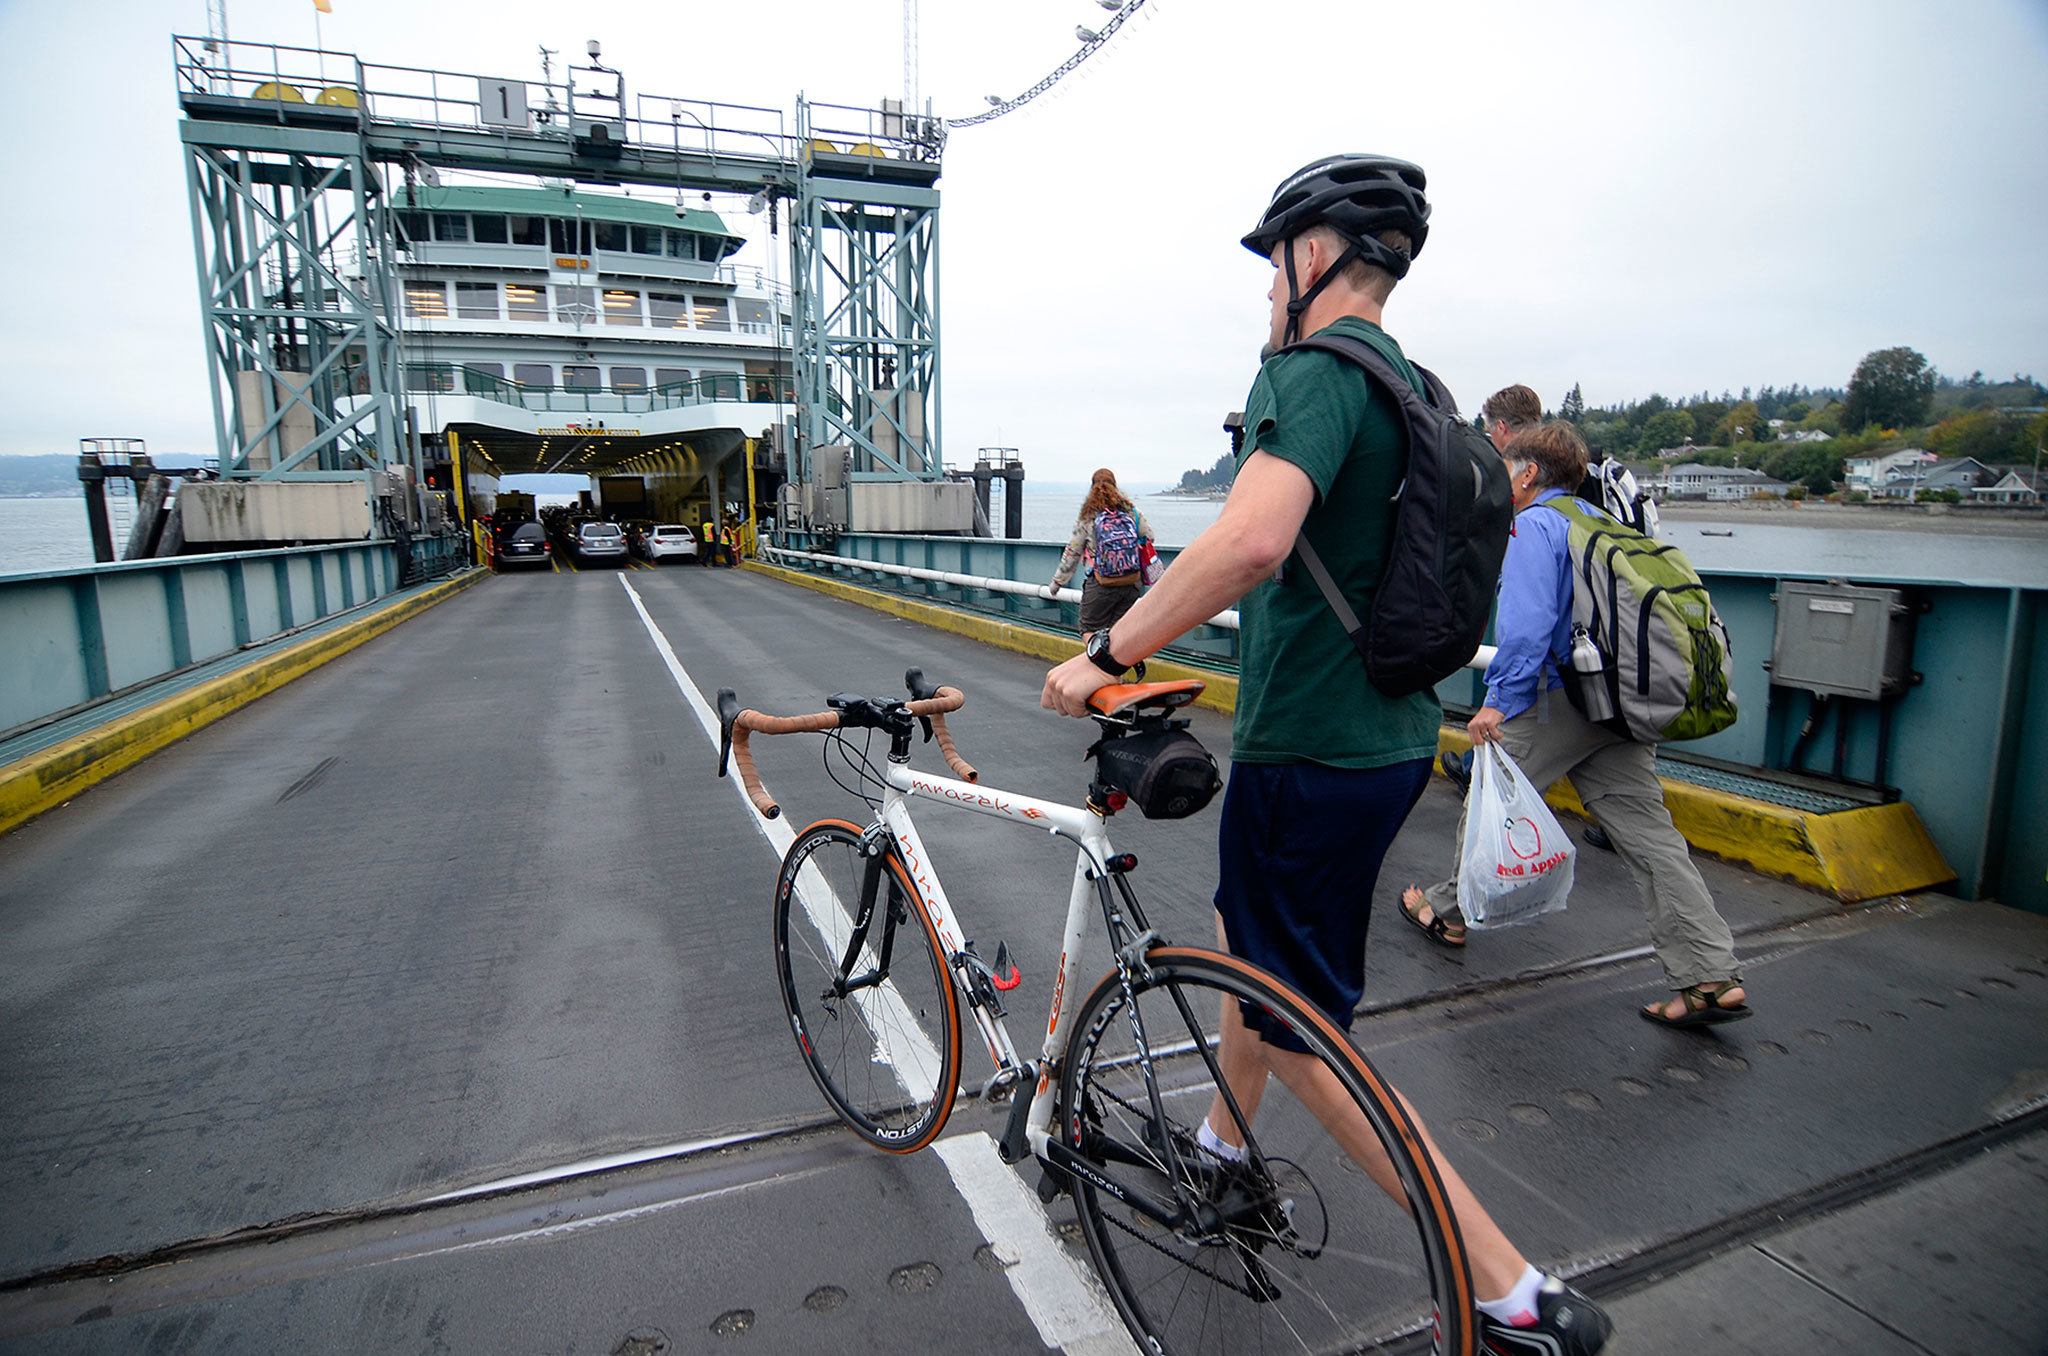 Justin Burnett/Whidbey News Group                                Commuters board the Tokitae in Clinton on Thursday morning. The Clinton Community Council is planning to discuss an effort to lobby for a second 144-car ferry on the route and the addition of overhead loading during a meeting later this month.